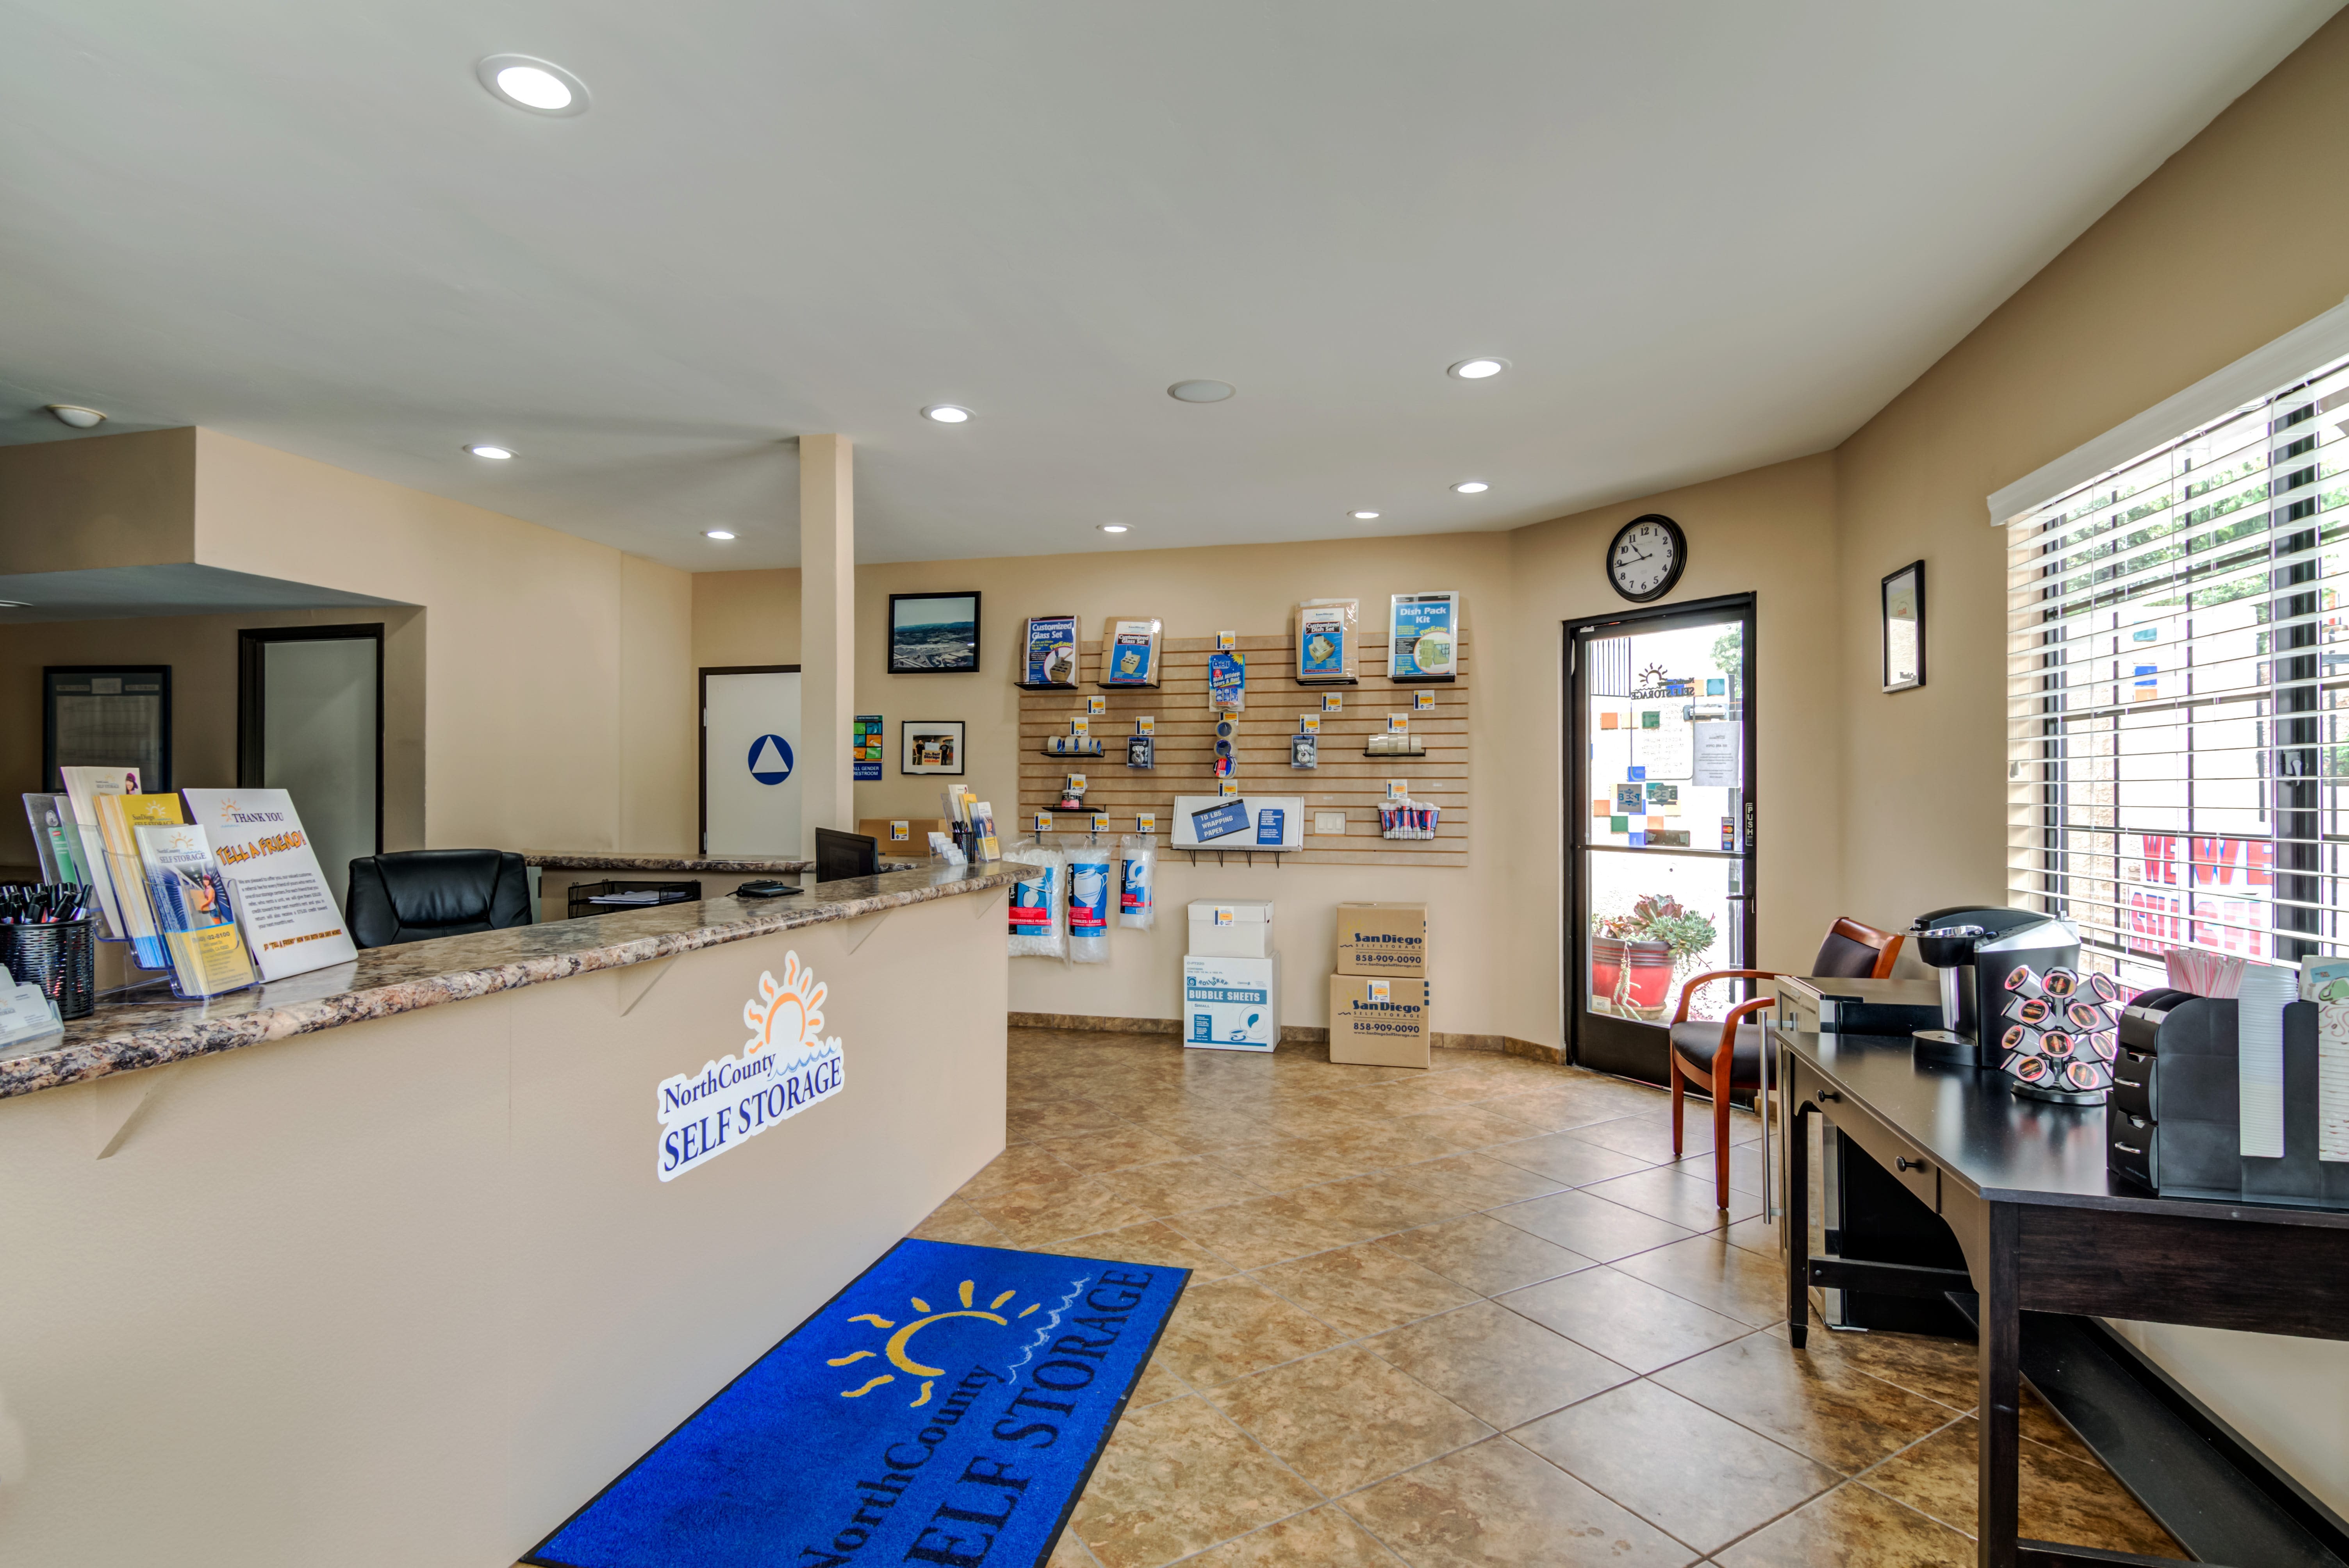 The inside of the front office at North County Self Storage in Escondido, CA